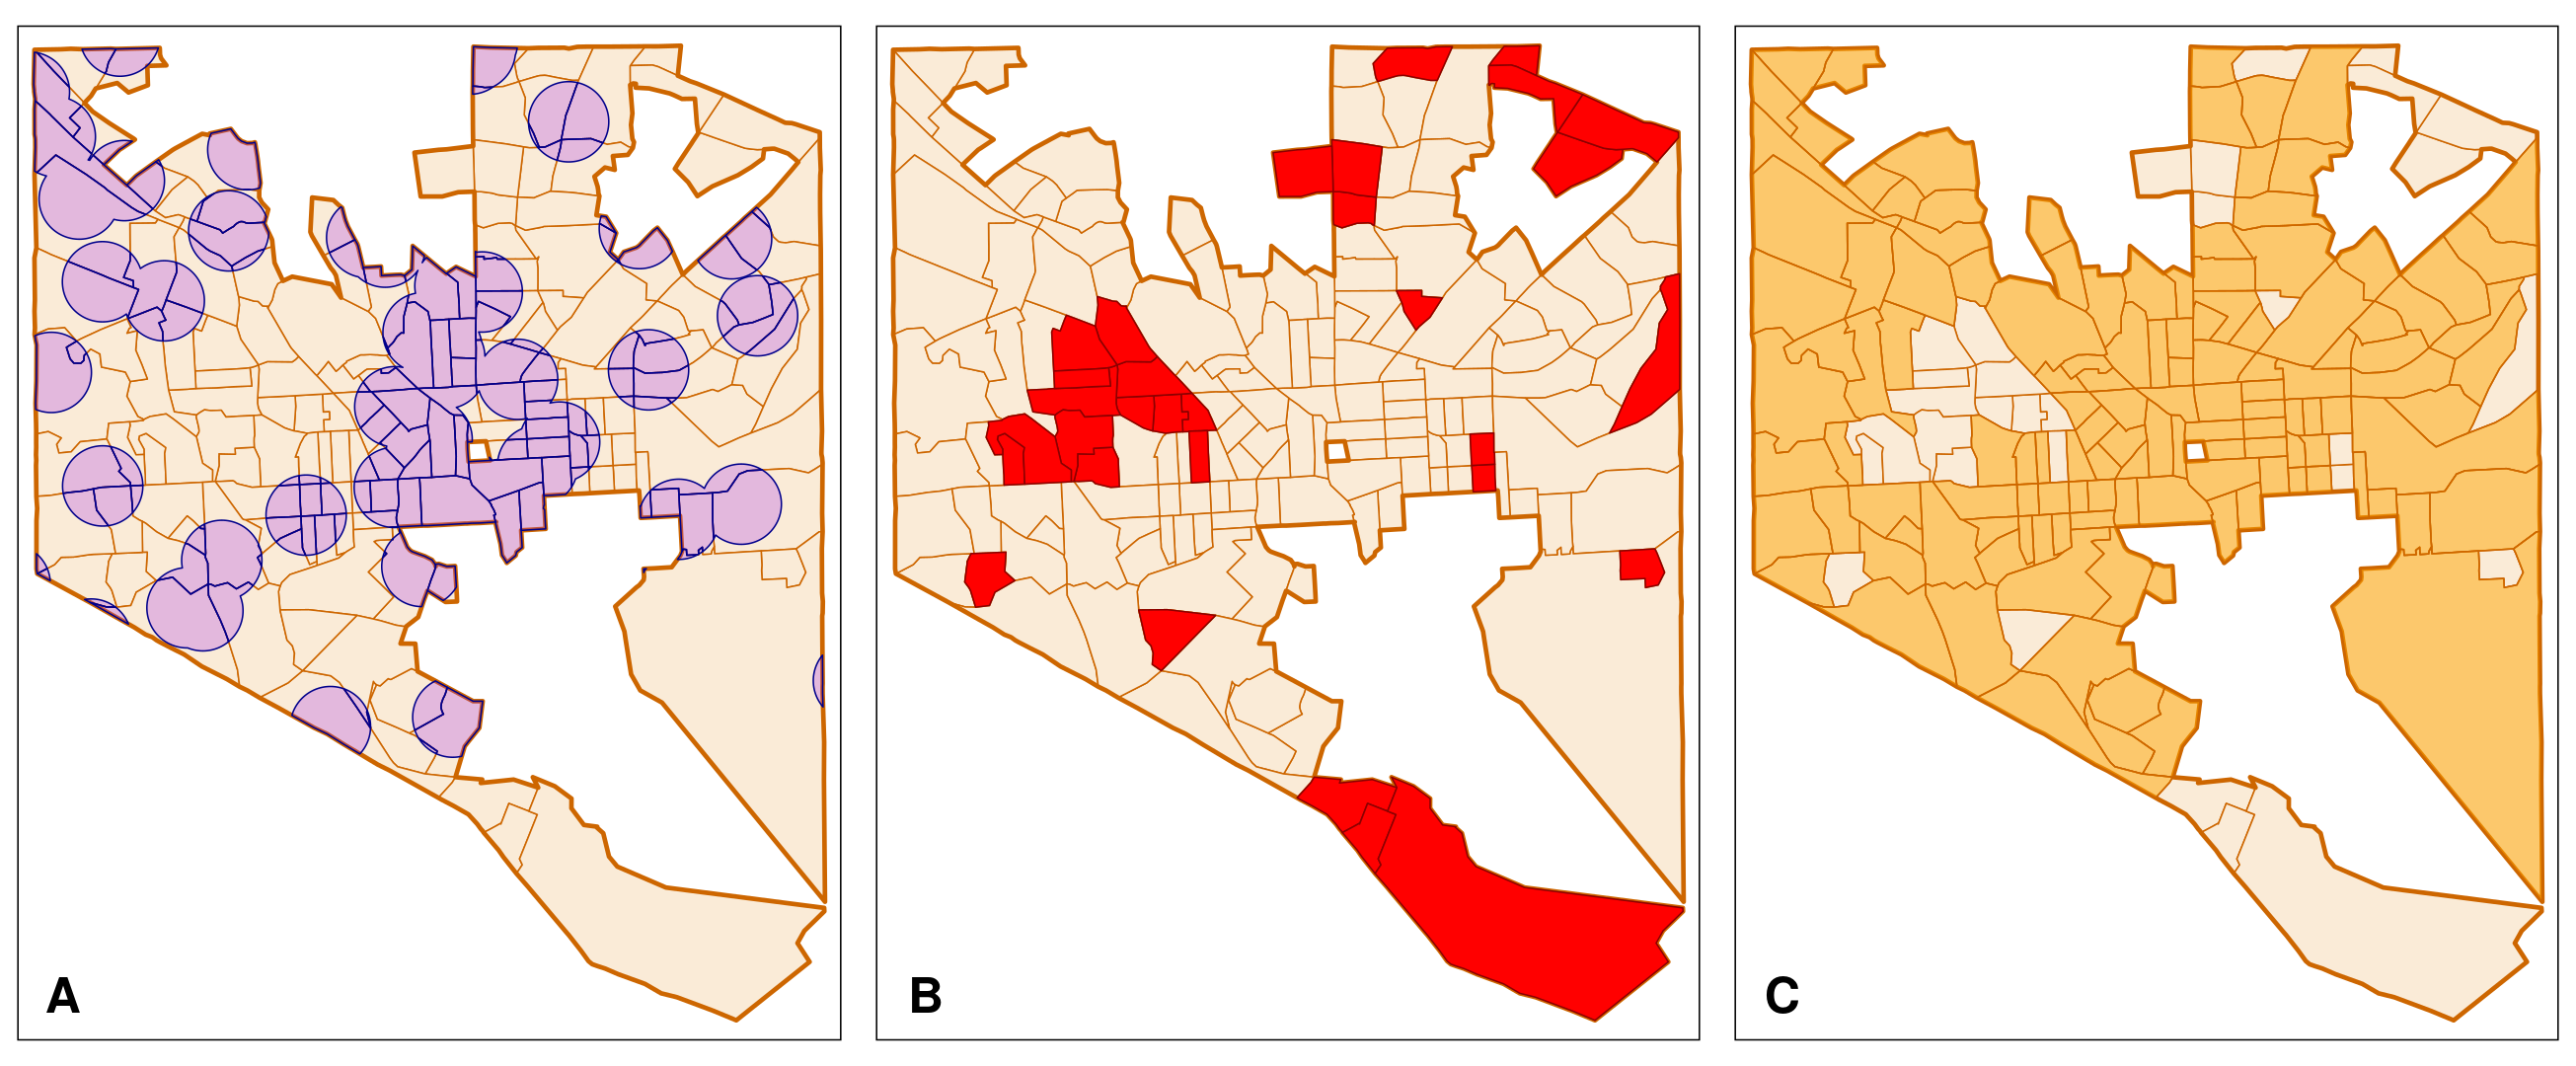 Three maps of Baltimore City that show the overlap of low-income areas and vaccination sites